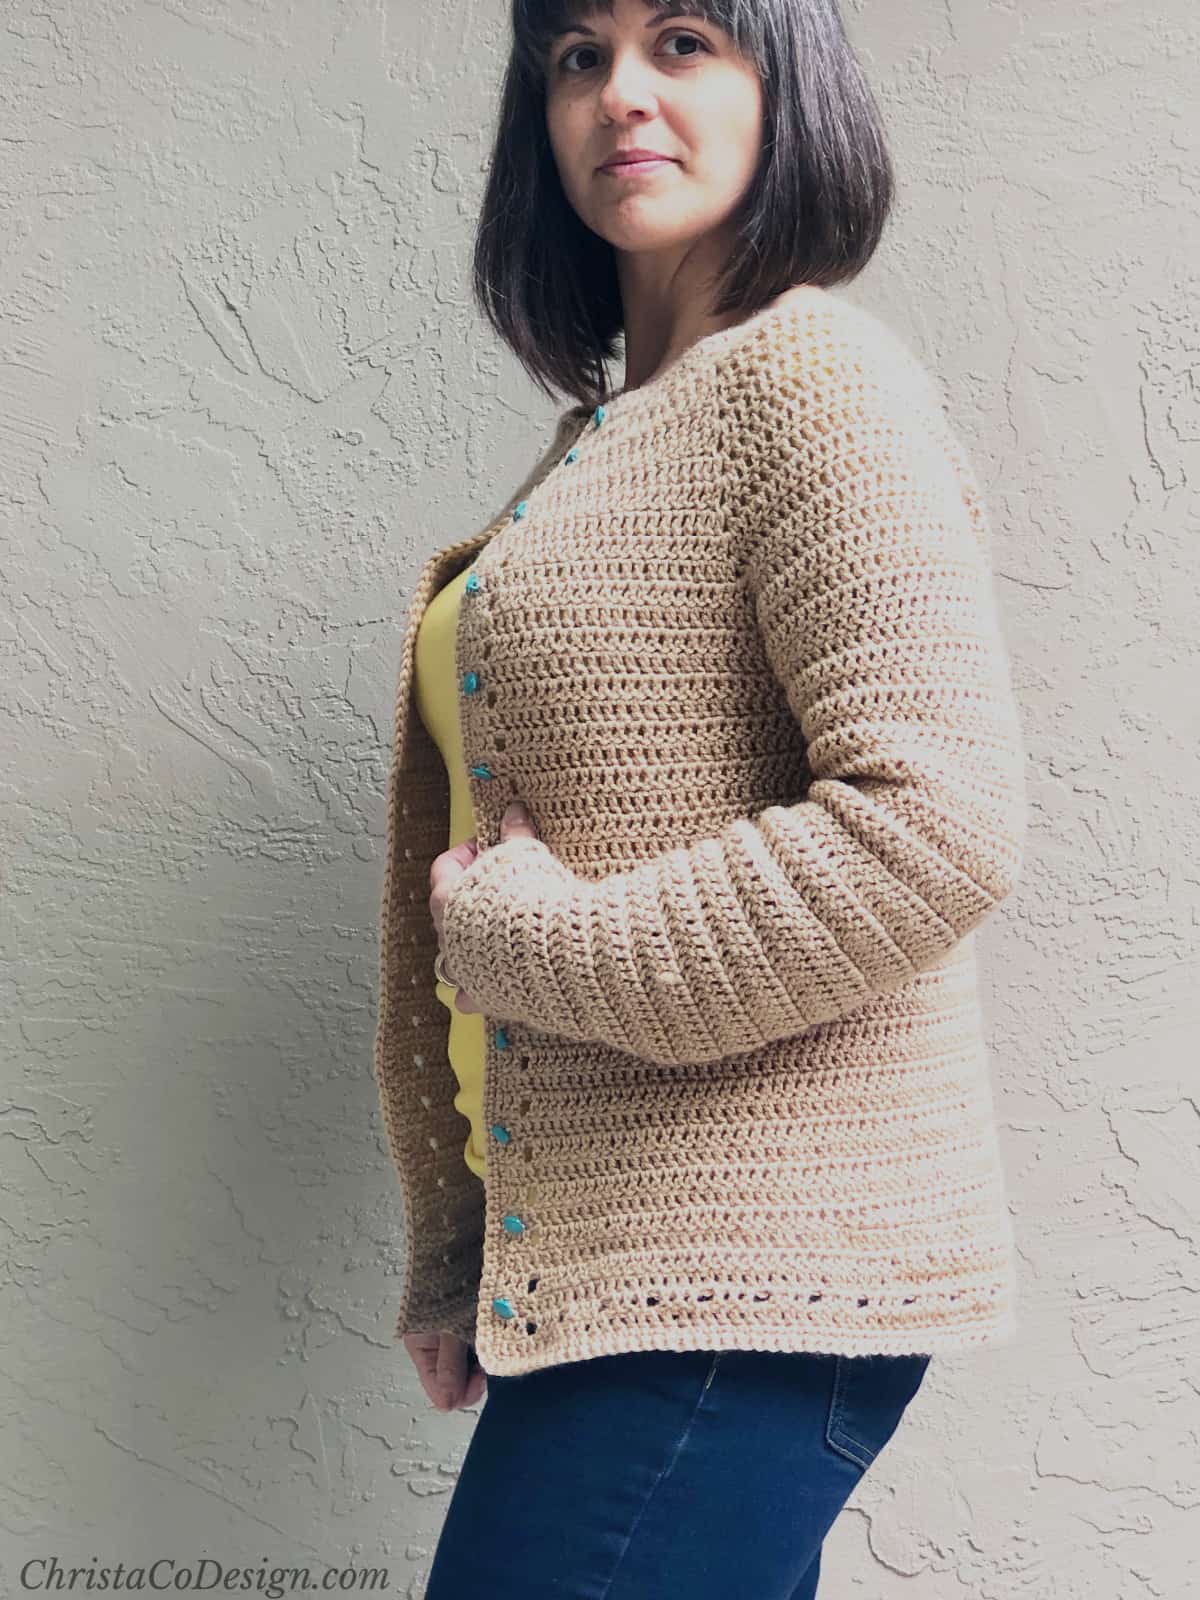 Woman turned to the side in beige crochet cardigan with elbow bent and smiling at camera.